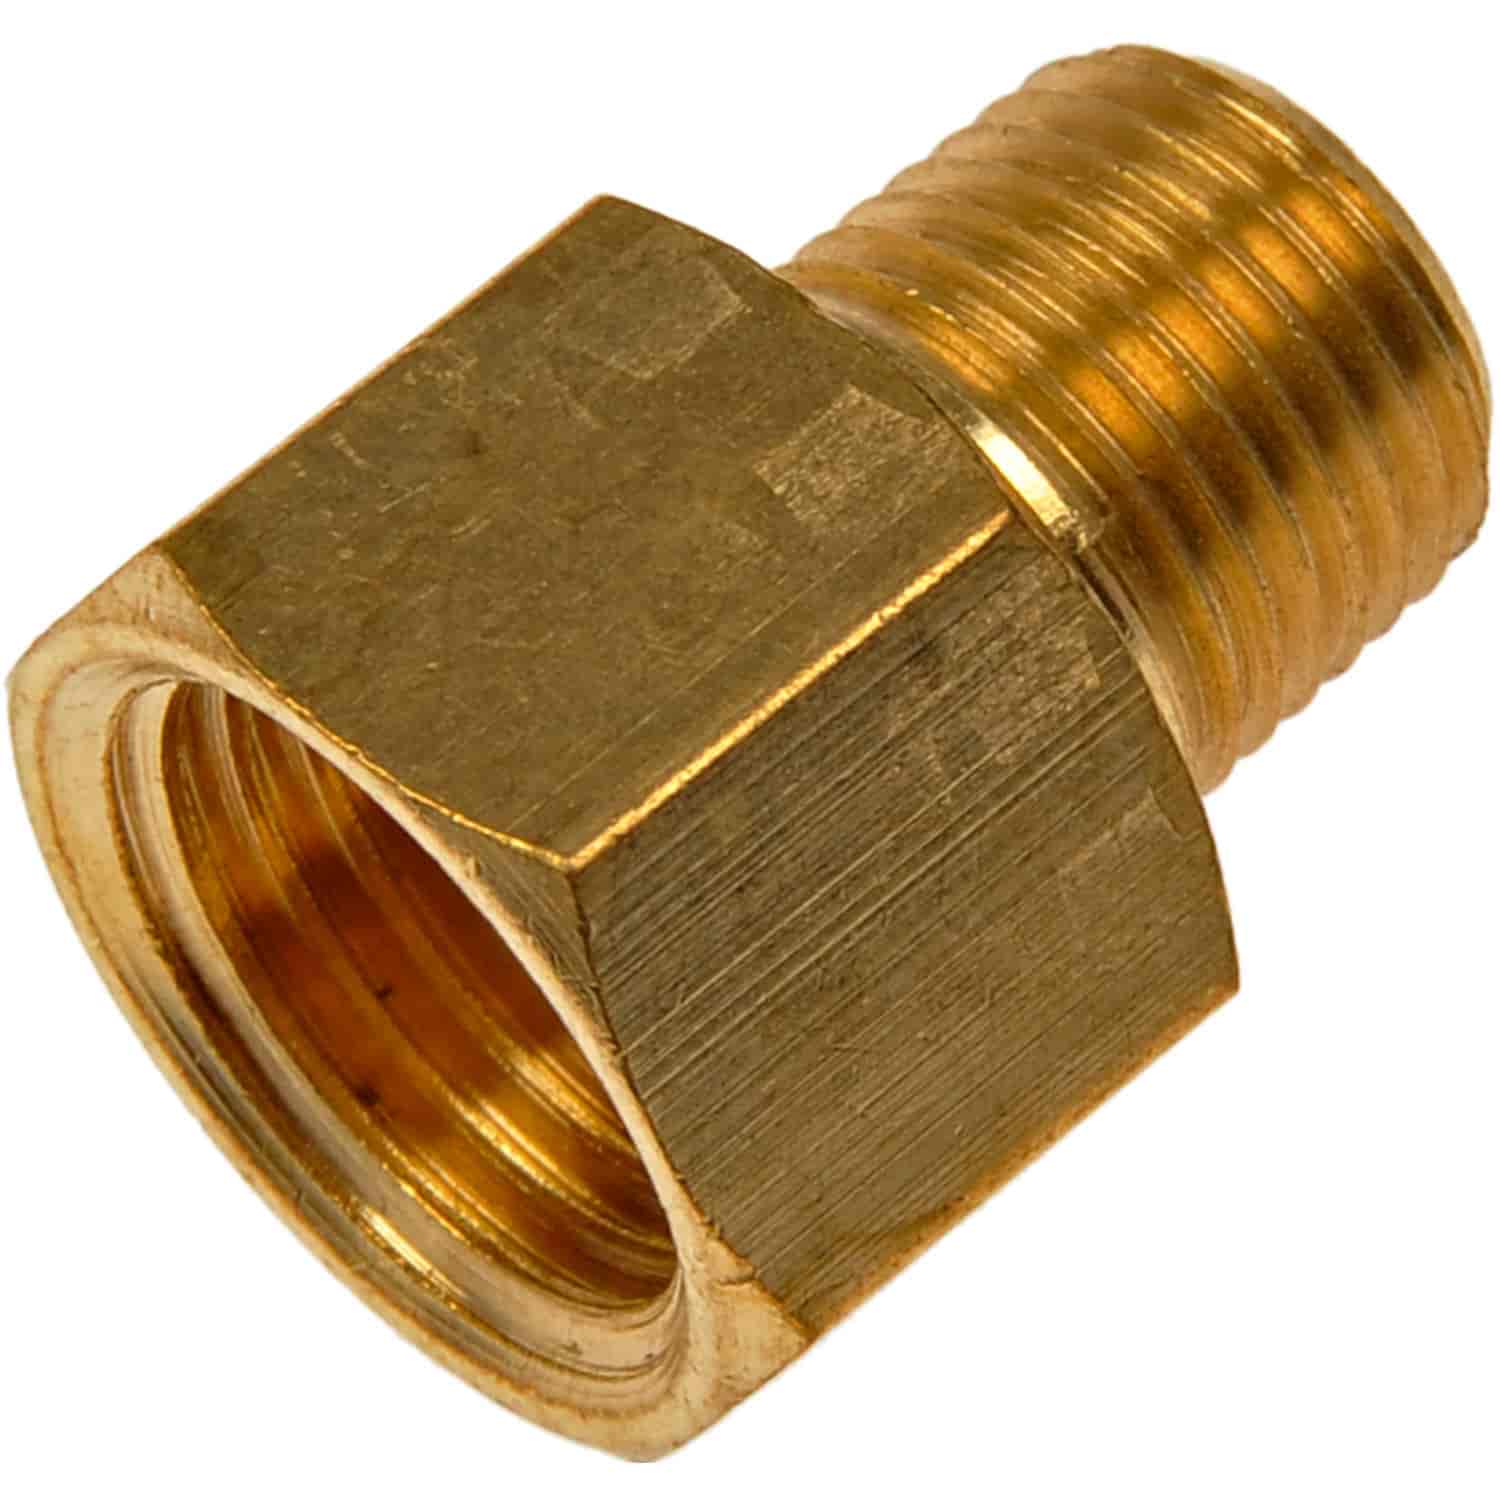 Inverted Flare Fitting Male Connector 5/16" x 1/8" MNPT